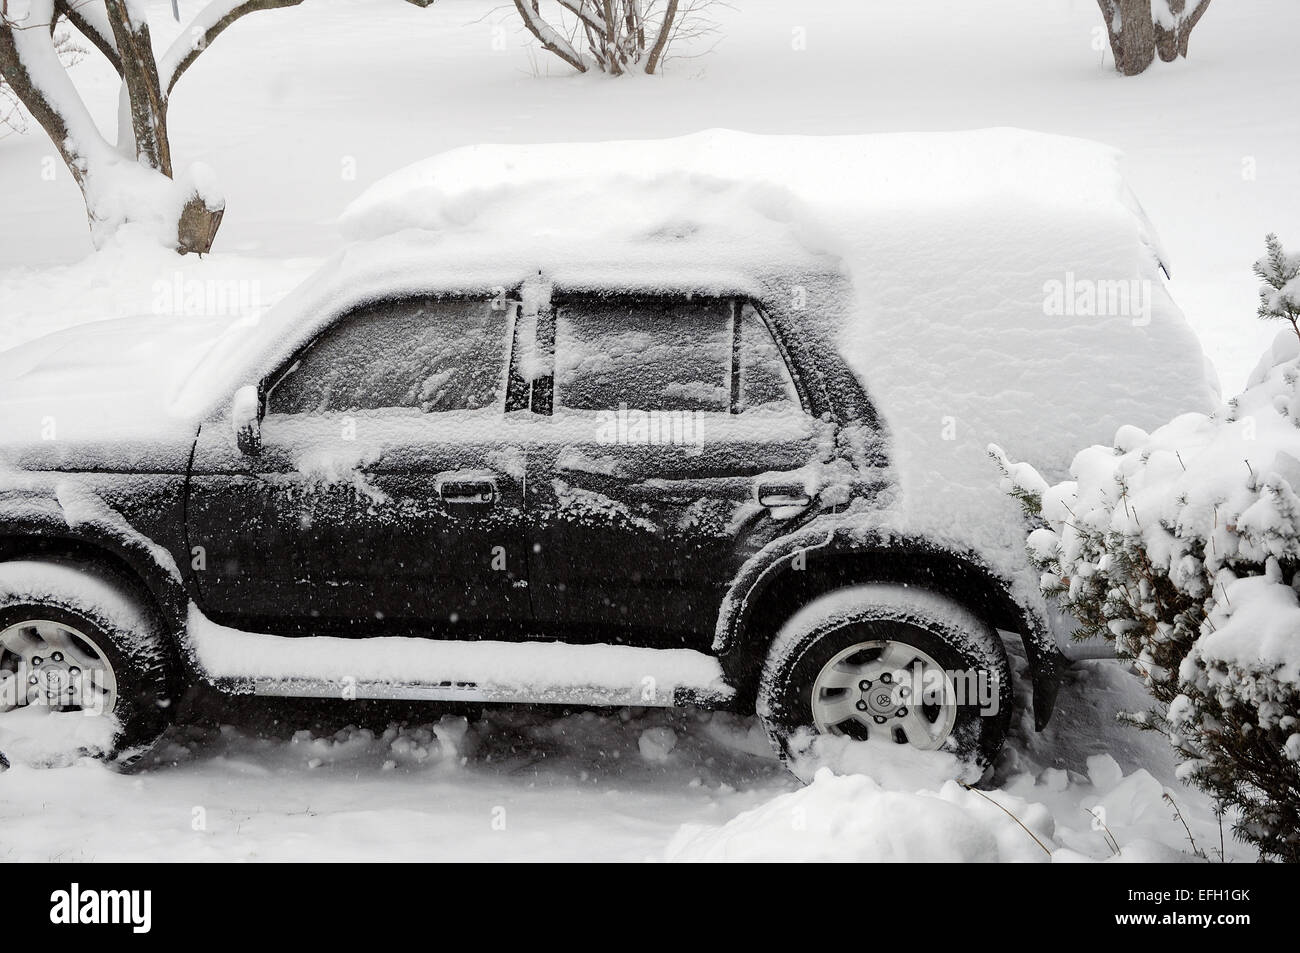 SUV covered in snow after storm Stock Photo